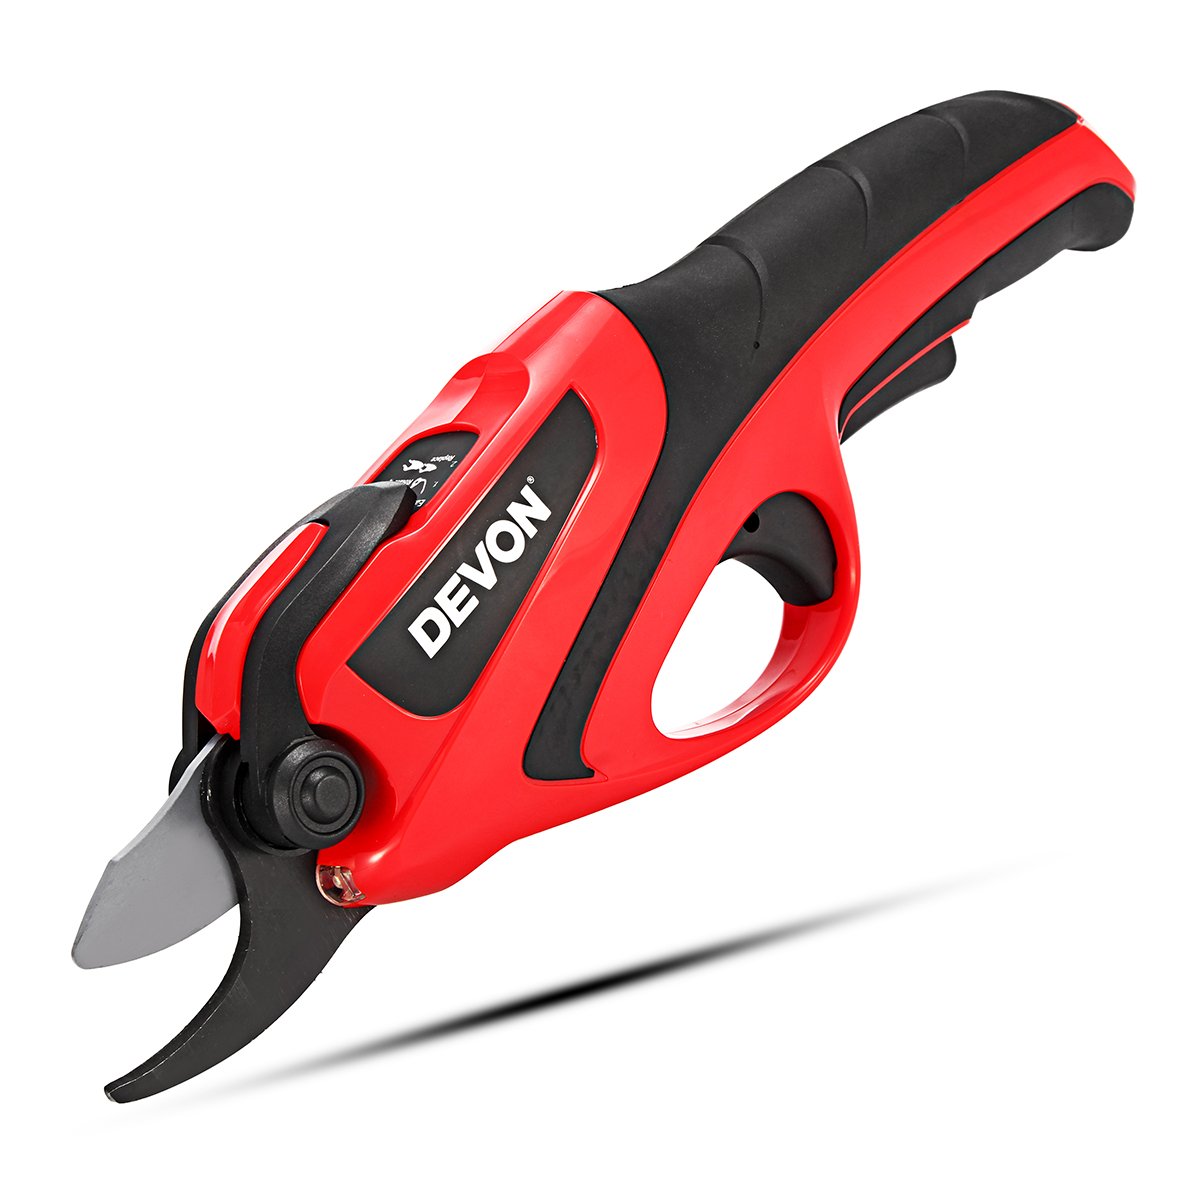 220-240V Rechargeable Electric 3.6V Battery Cordless Secateur Branch Cutter Pruning Shears 2